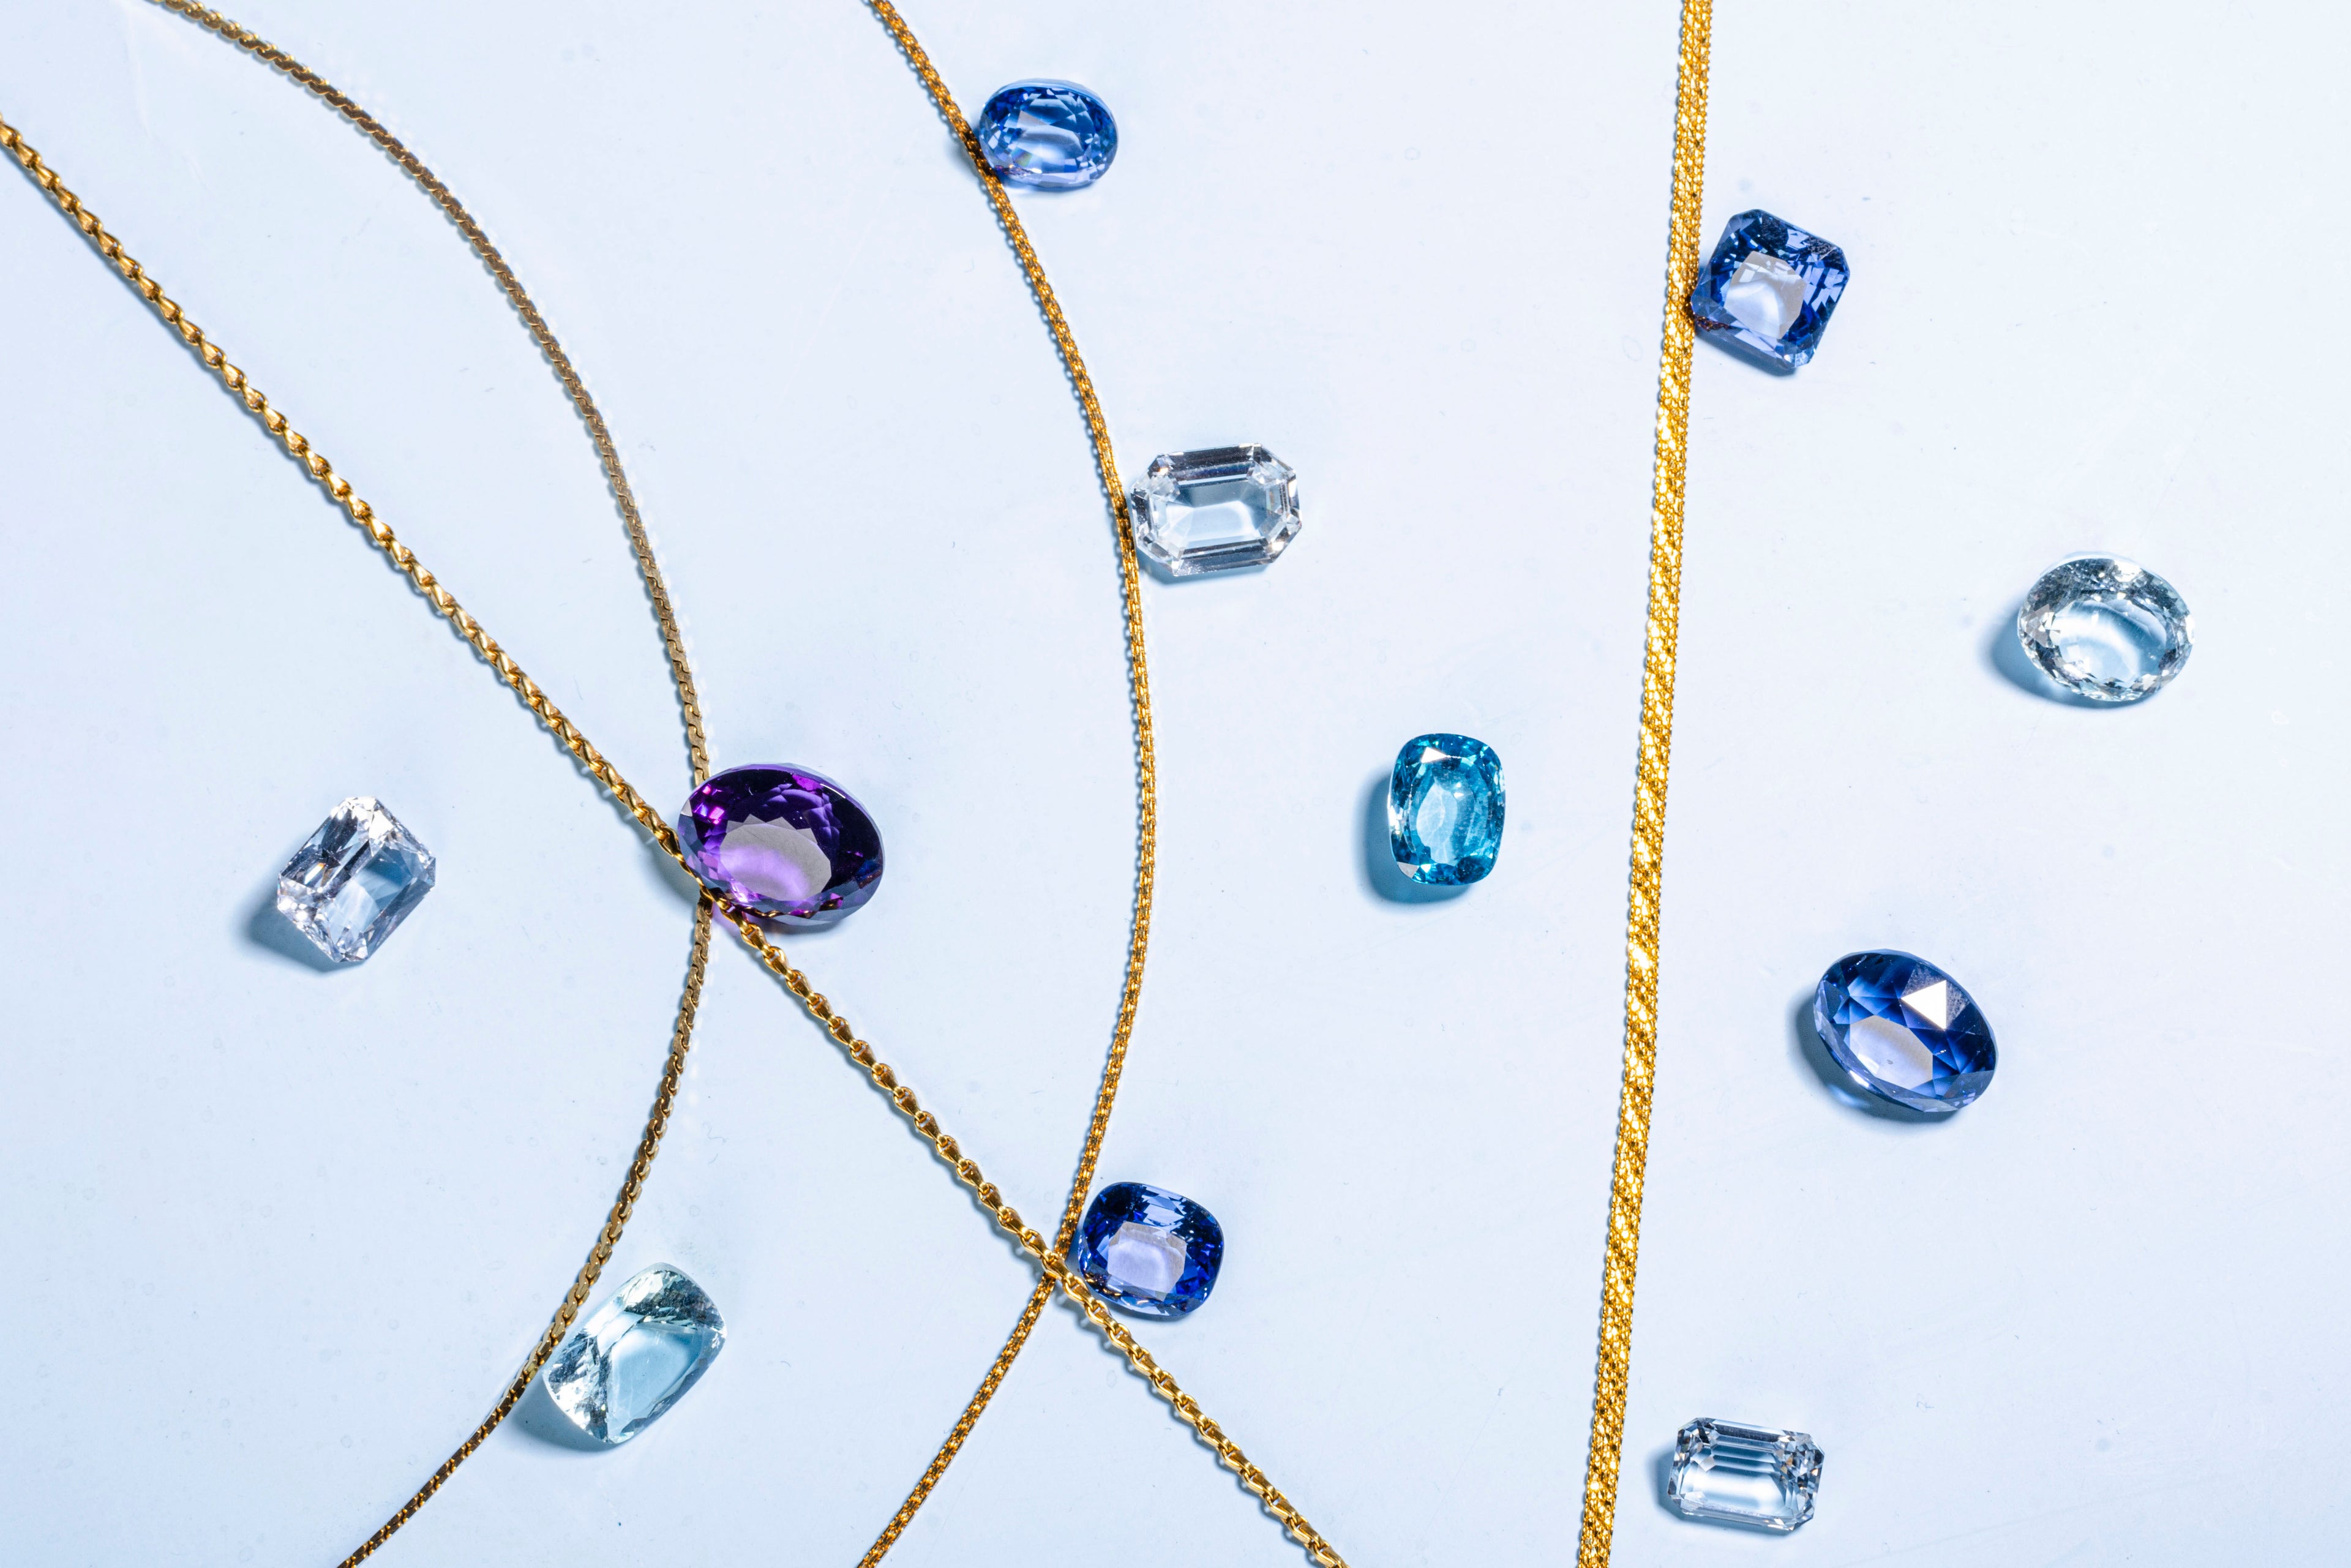 cut and polished coloured gems along a gold chain